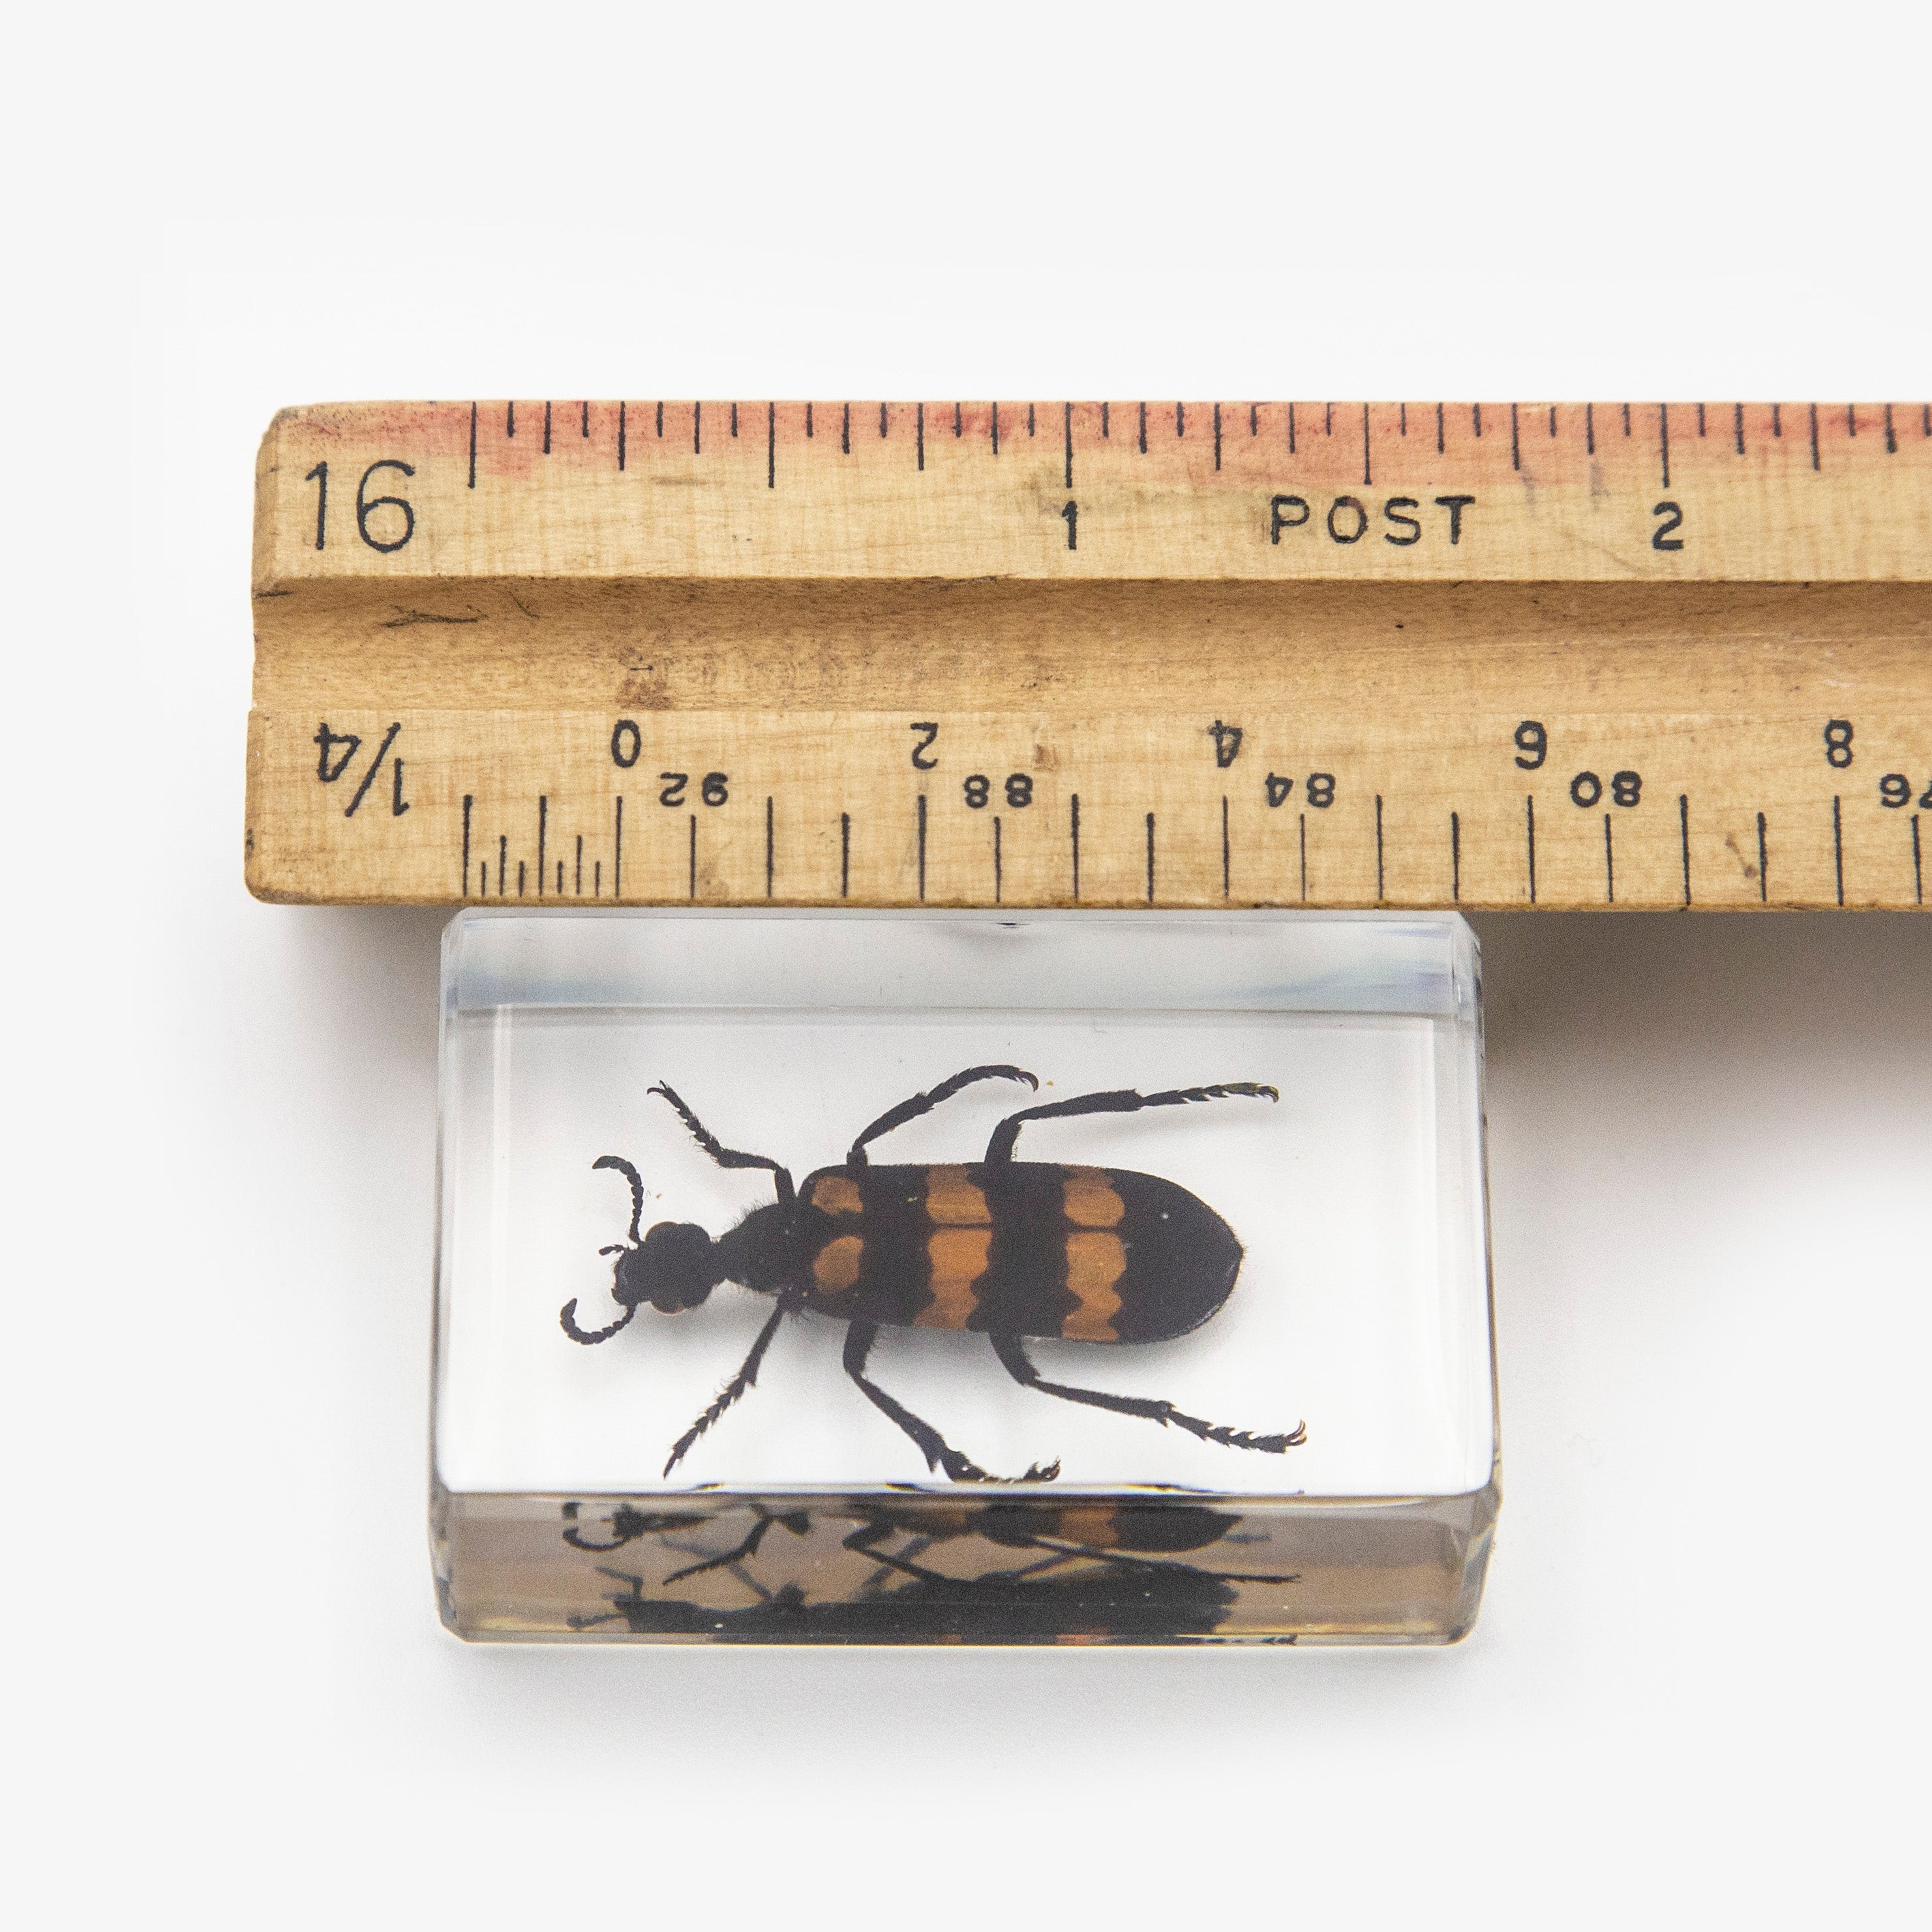 Blister Beetle Resin Paperweight (Small)